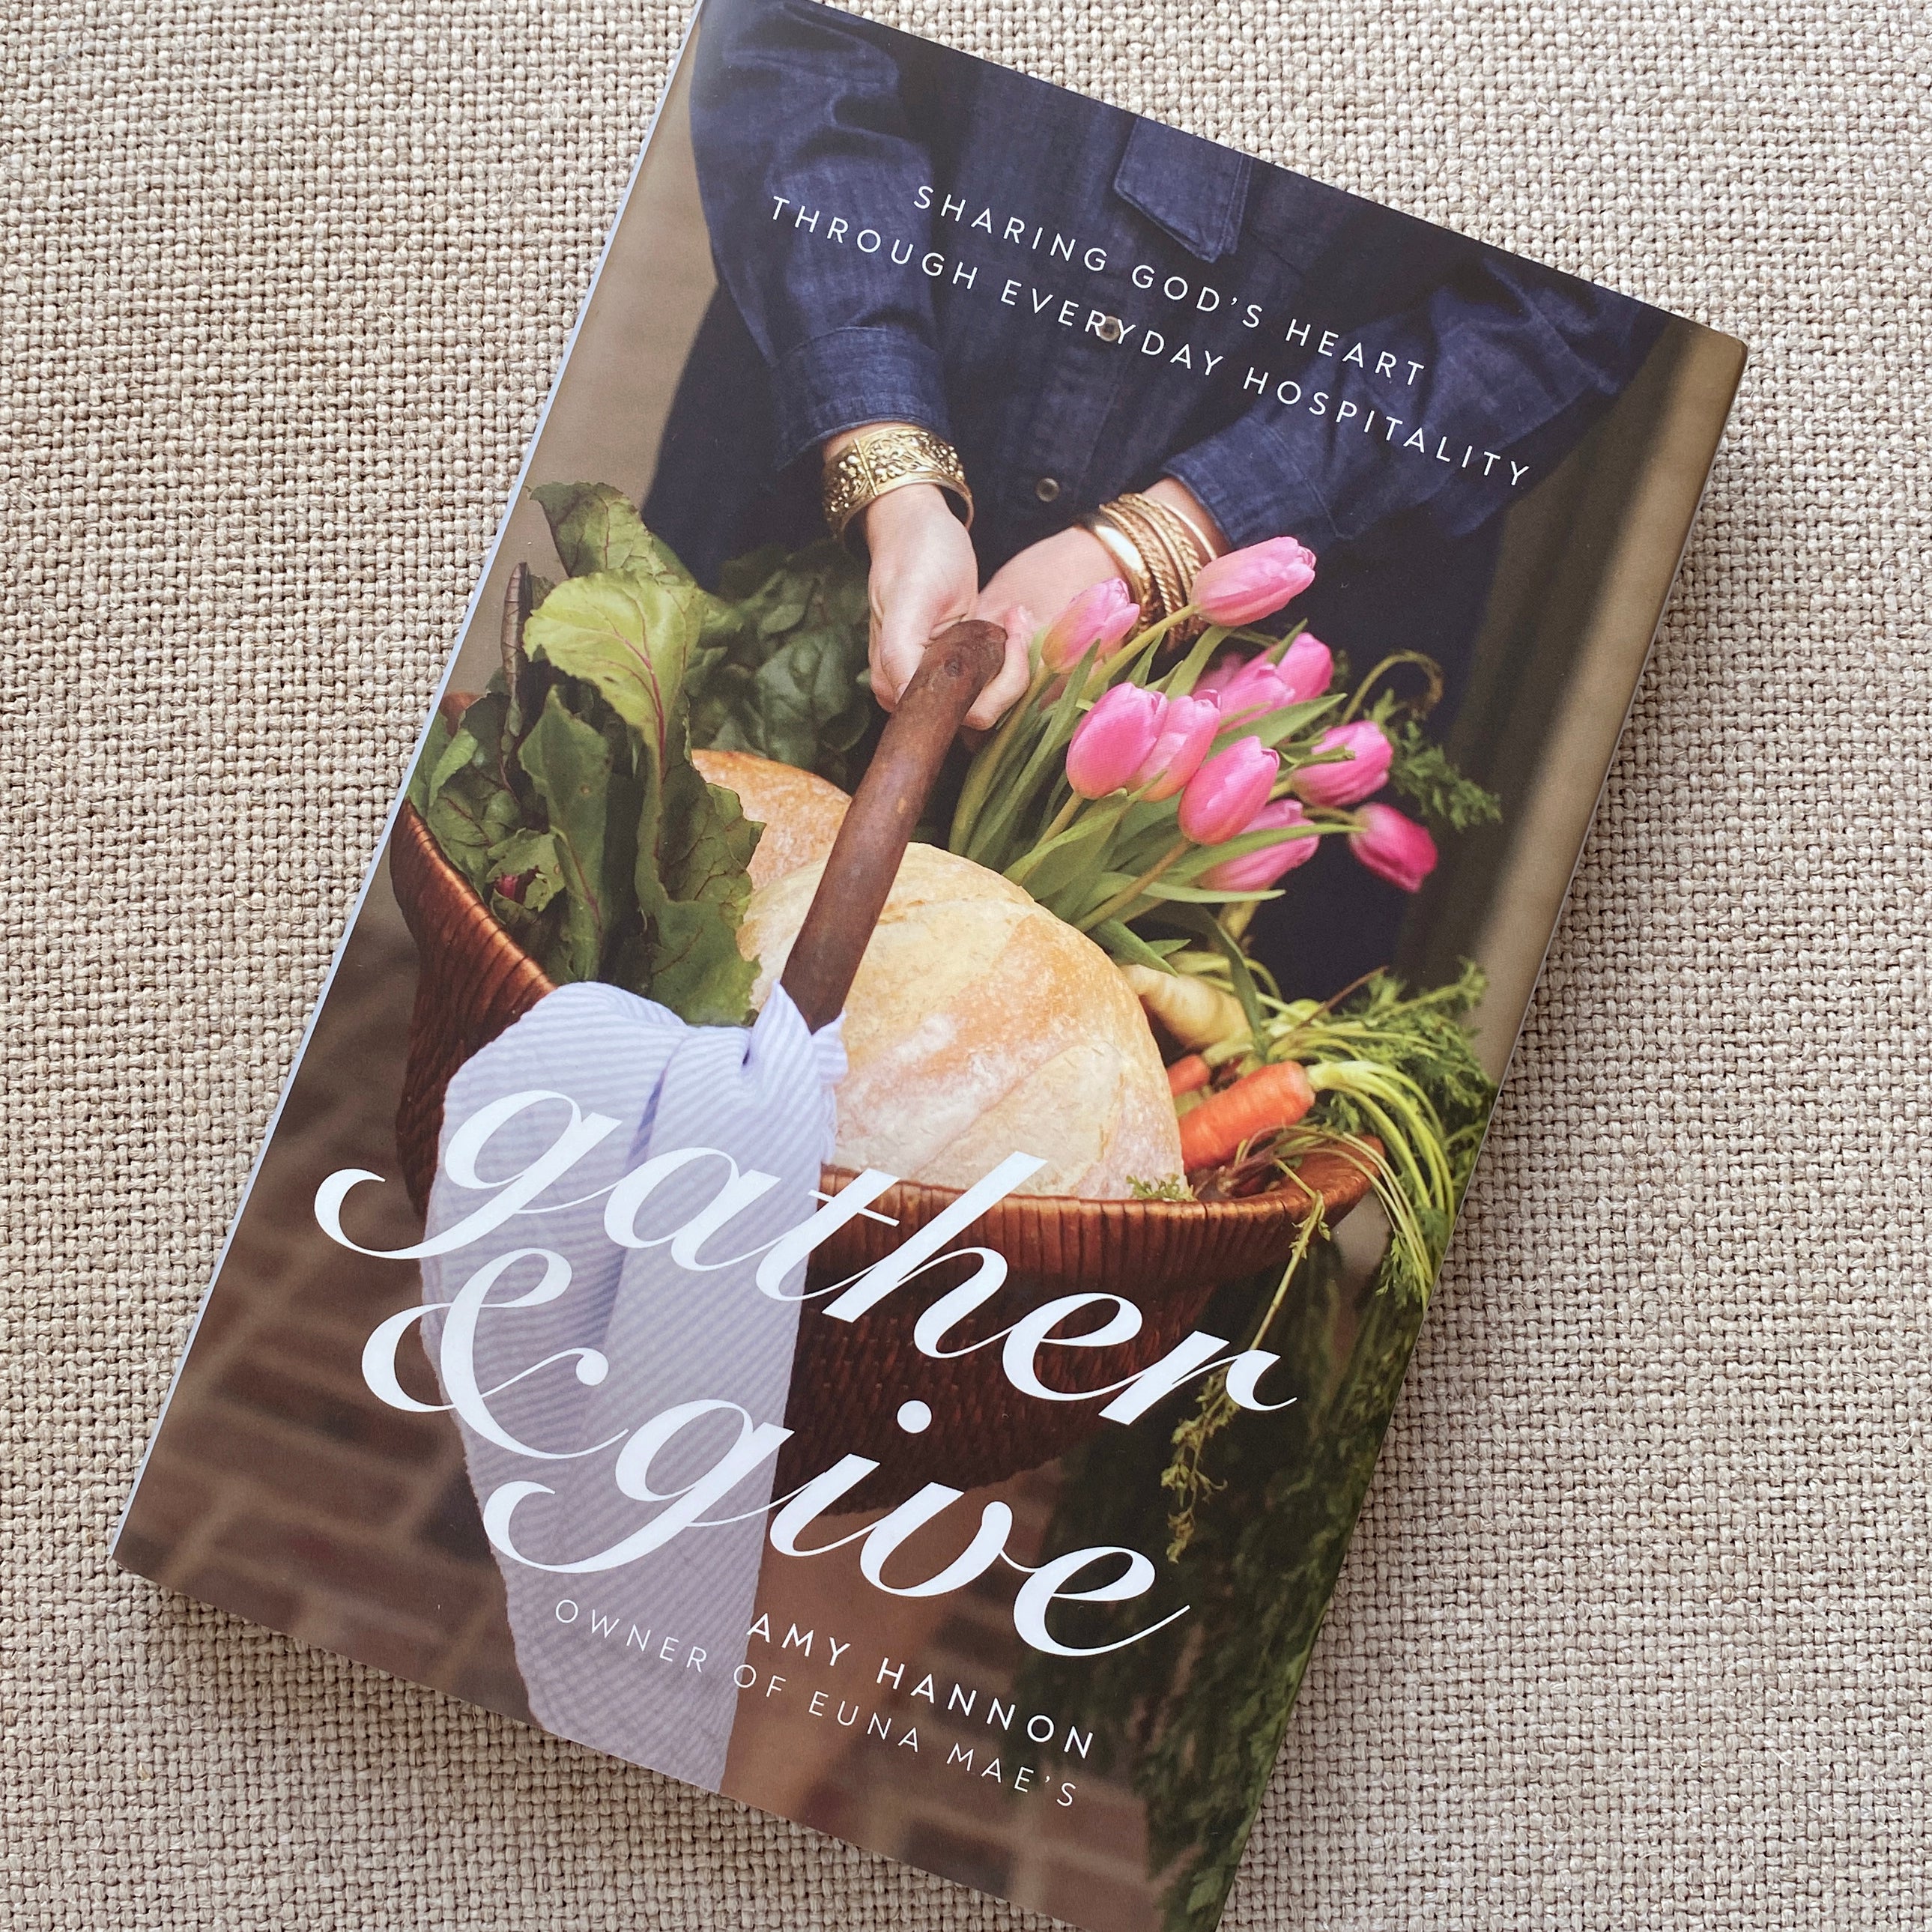 Book: Gather & Give - Sharing God's Heart Through Everyday Hospitality